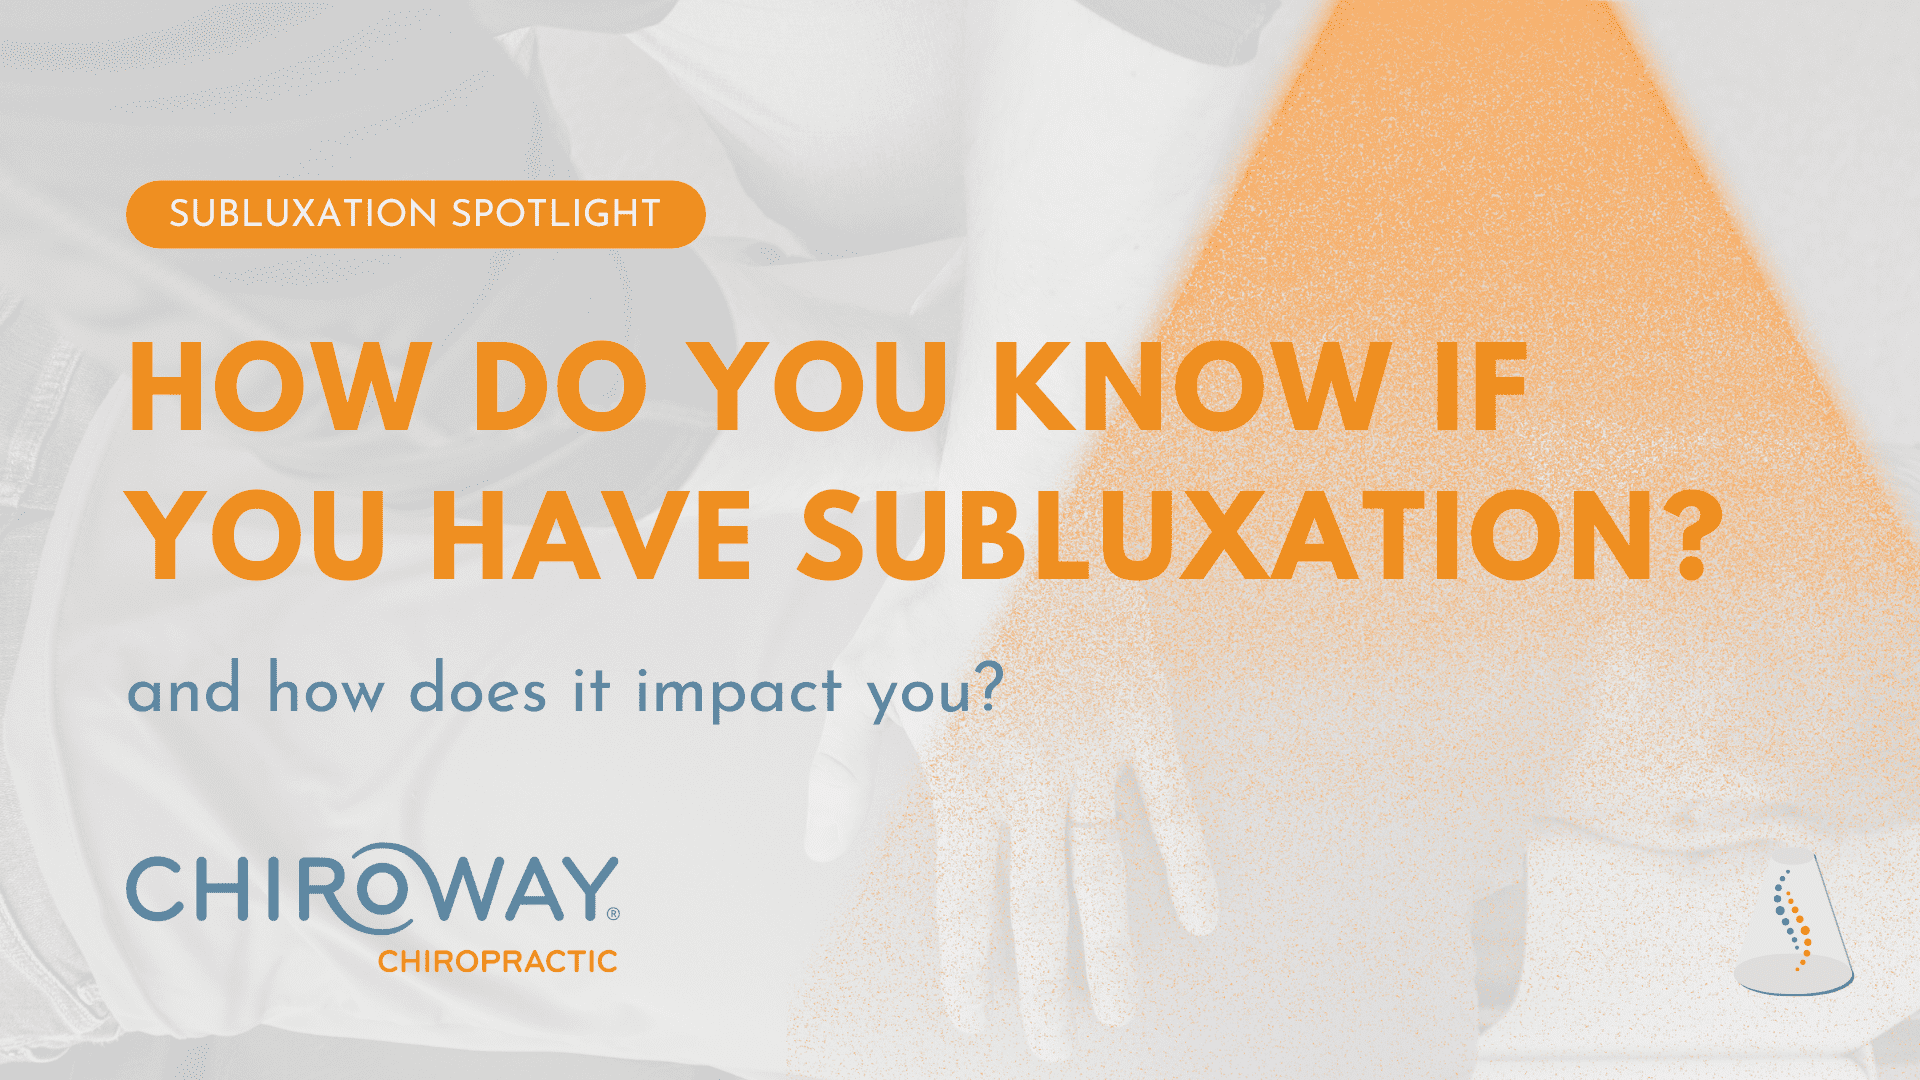 How do you know if you have vertebral subluxation?